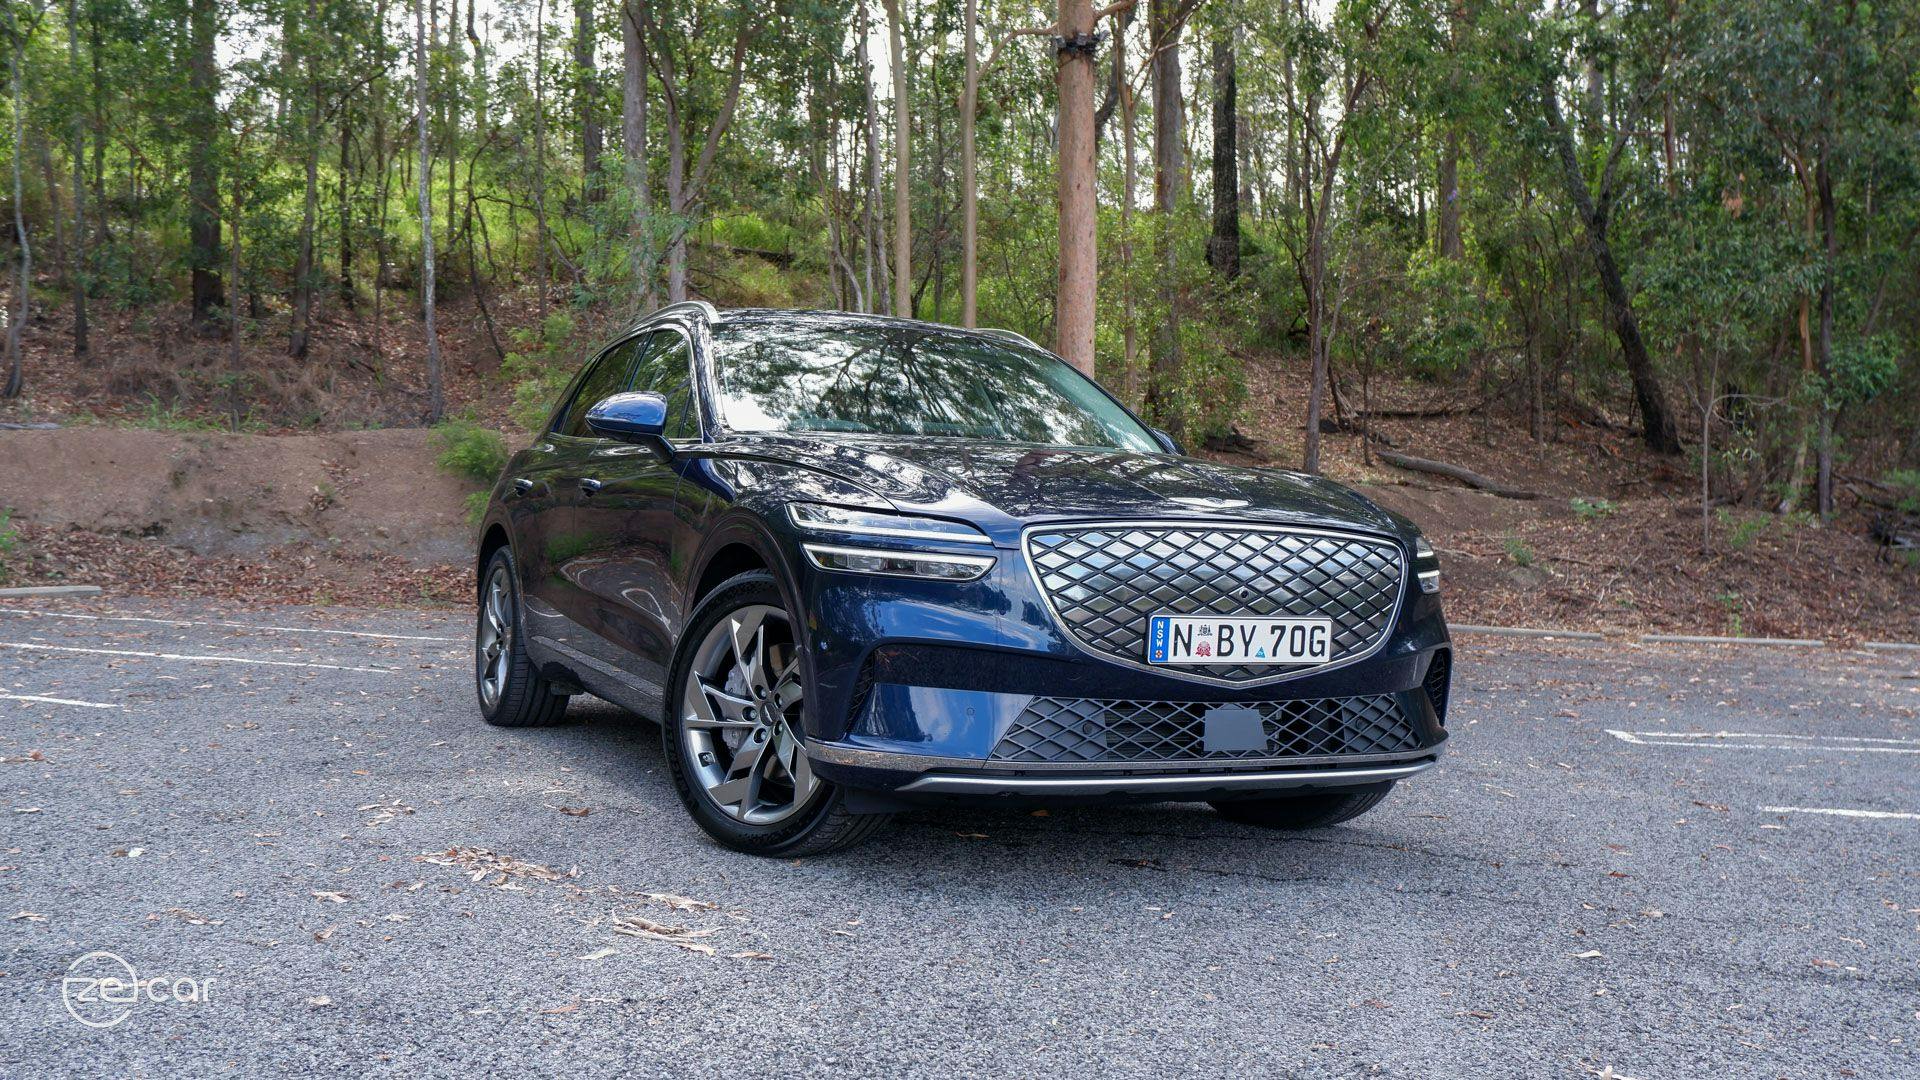 Dark blue Genesis Electrified GV70 in front of hiking forest